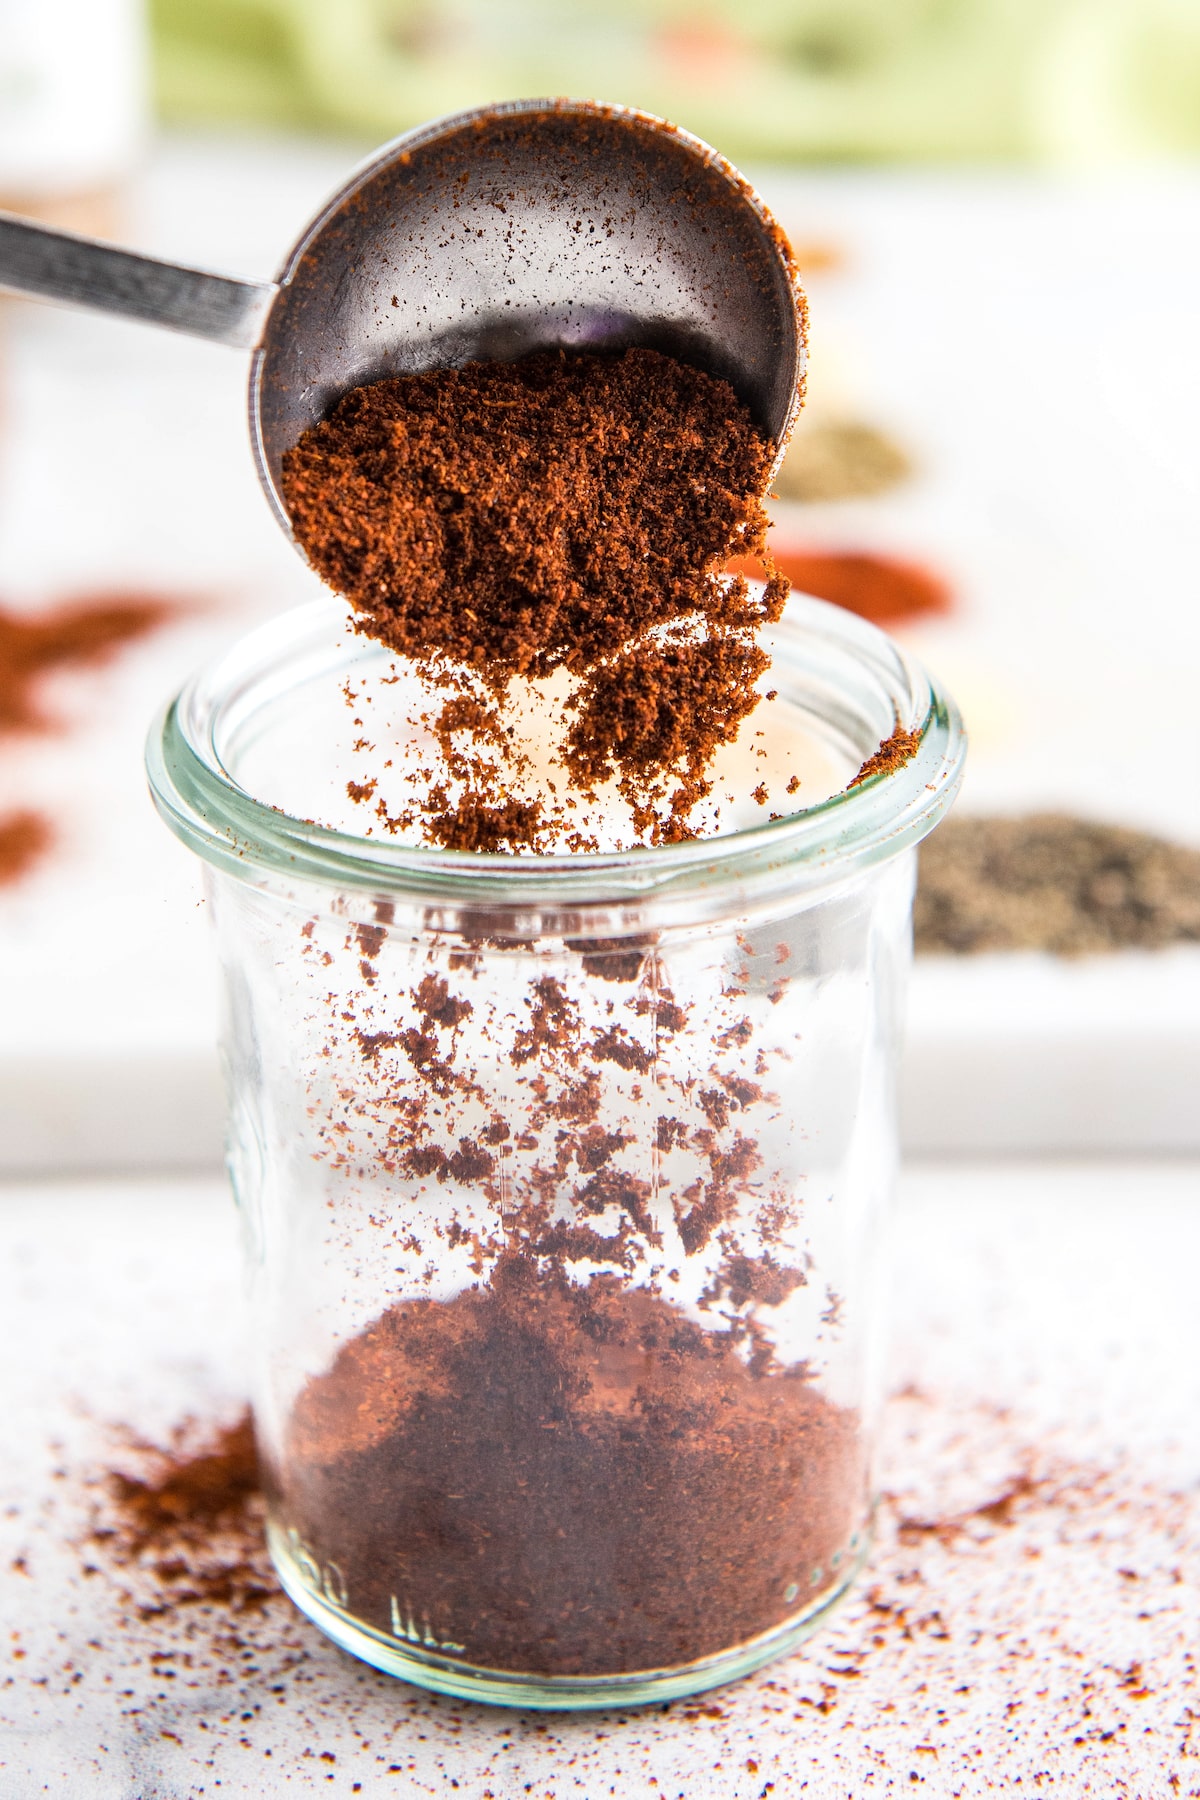 Chili powder being poured into a glass jar.